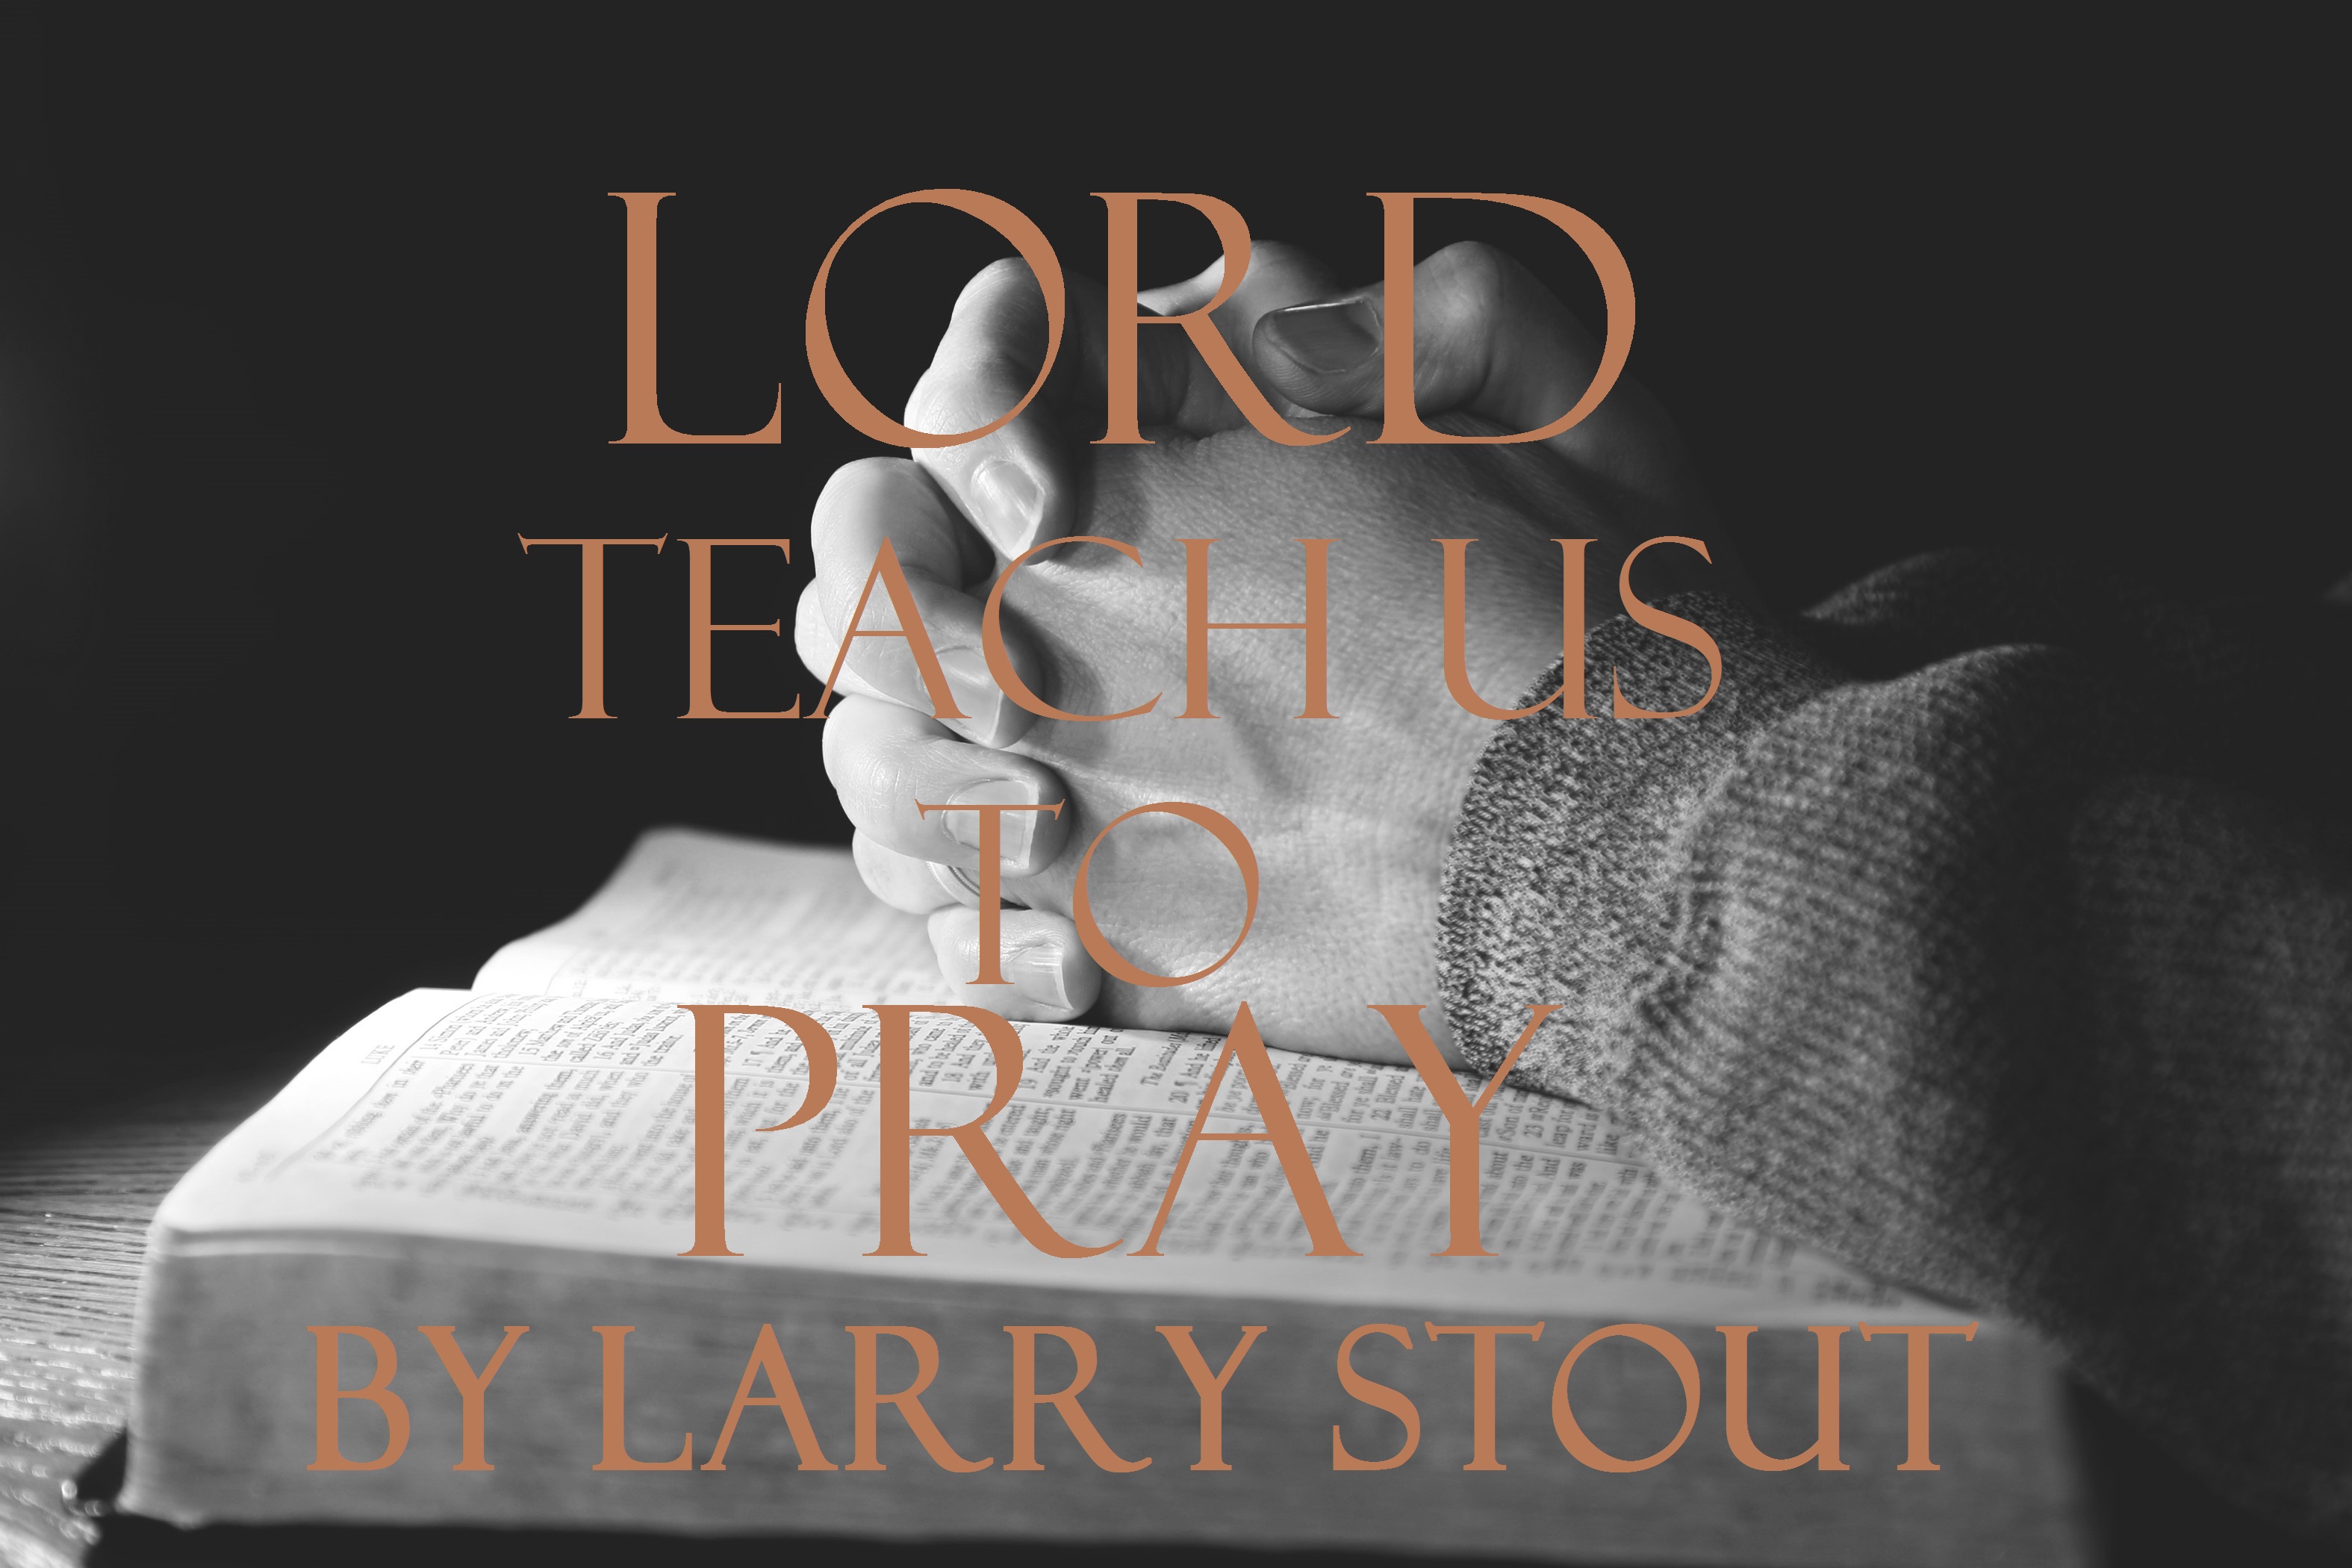 Lord, Teach Us to Pray by Pastor Larry Stout